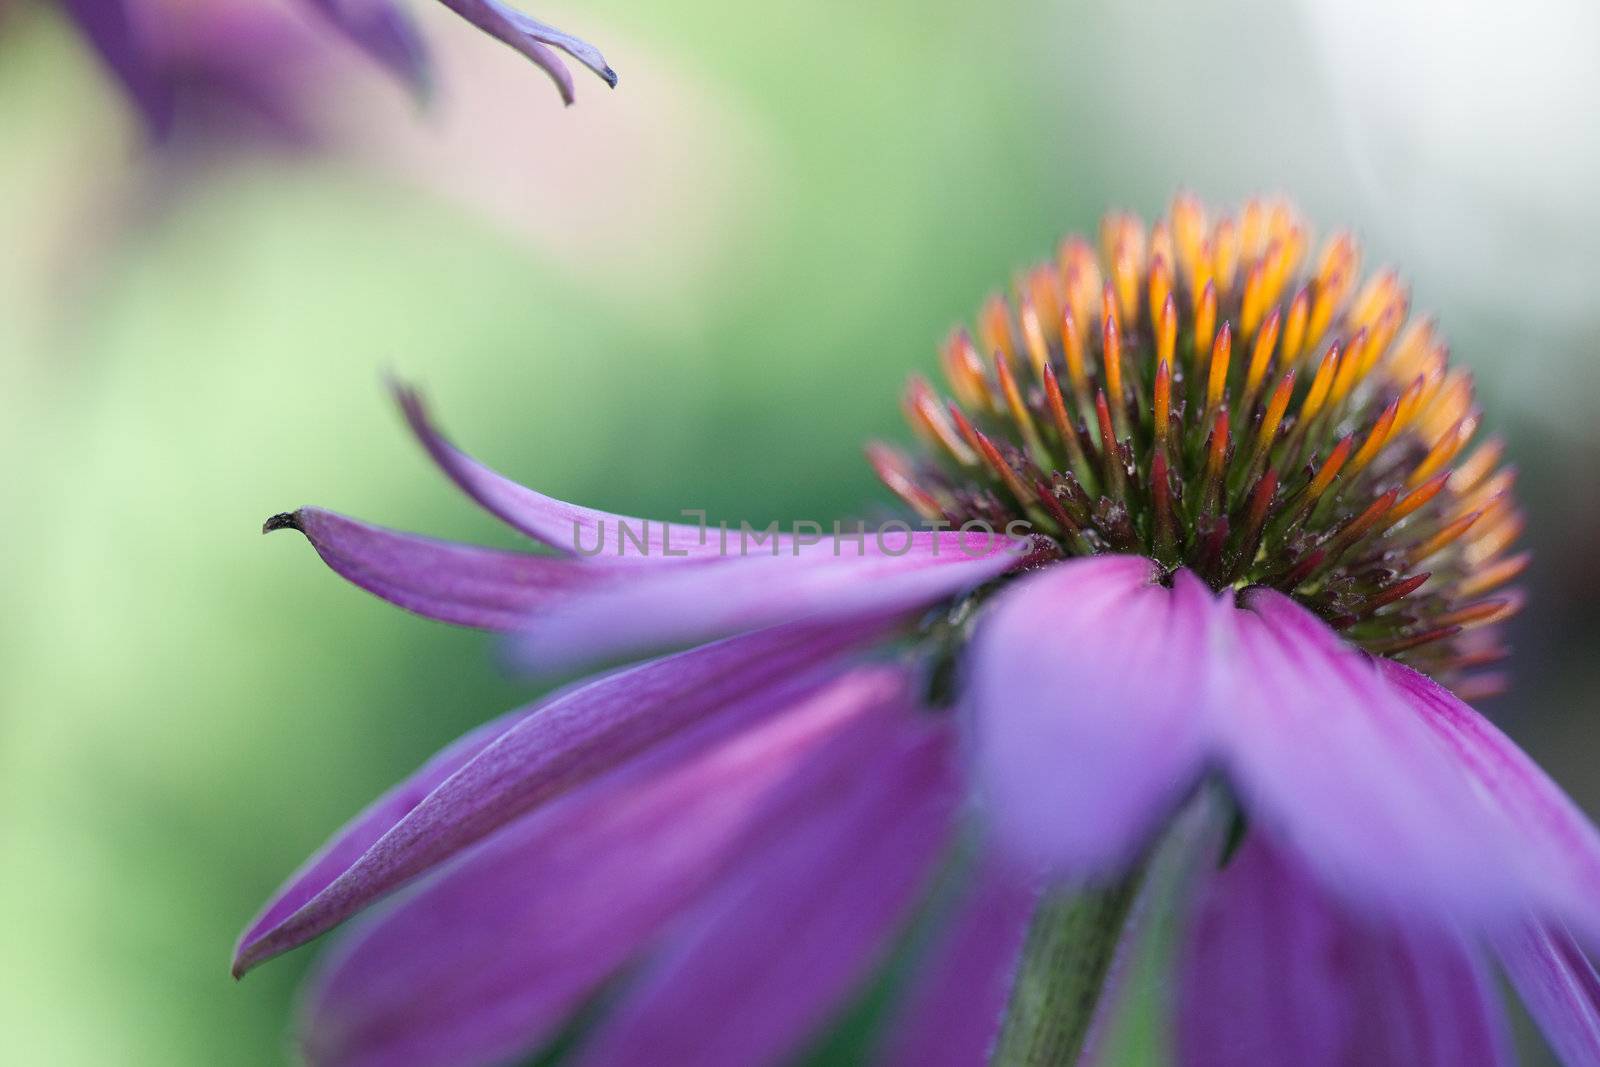 Violet and blur strokes of the flower Echinacea